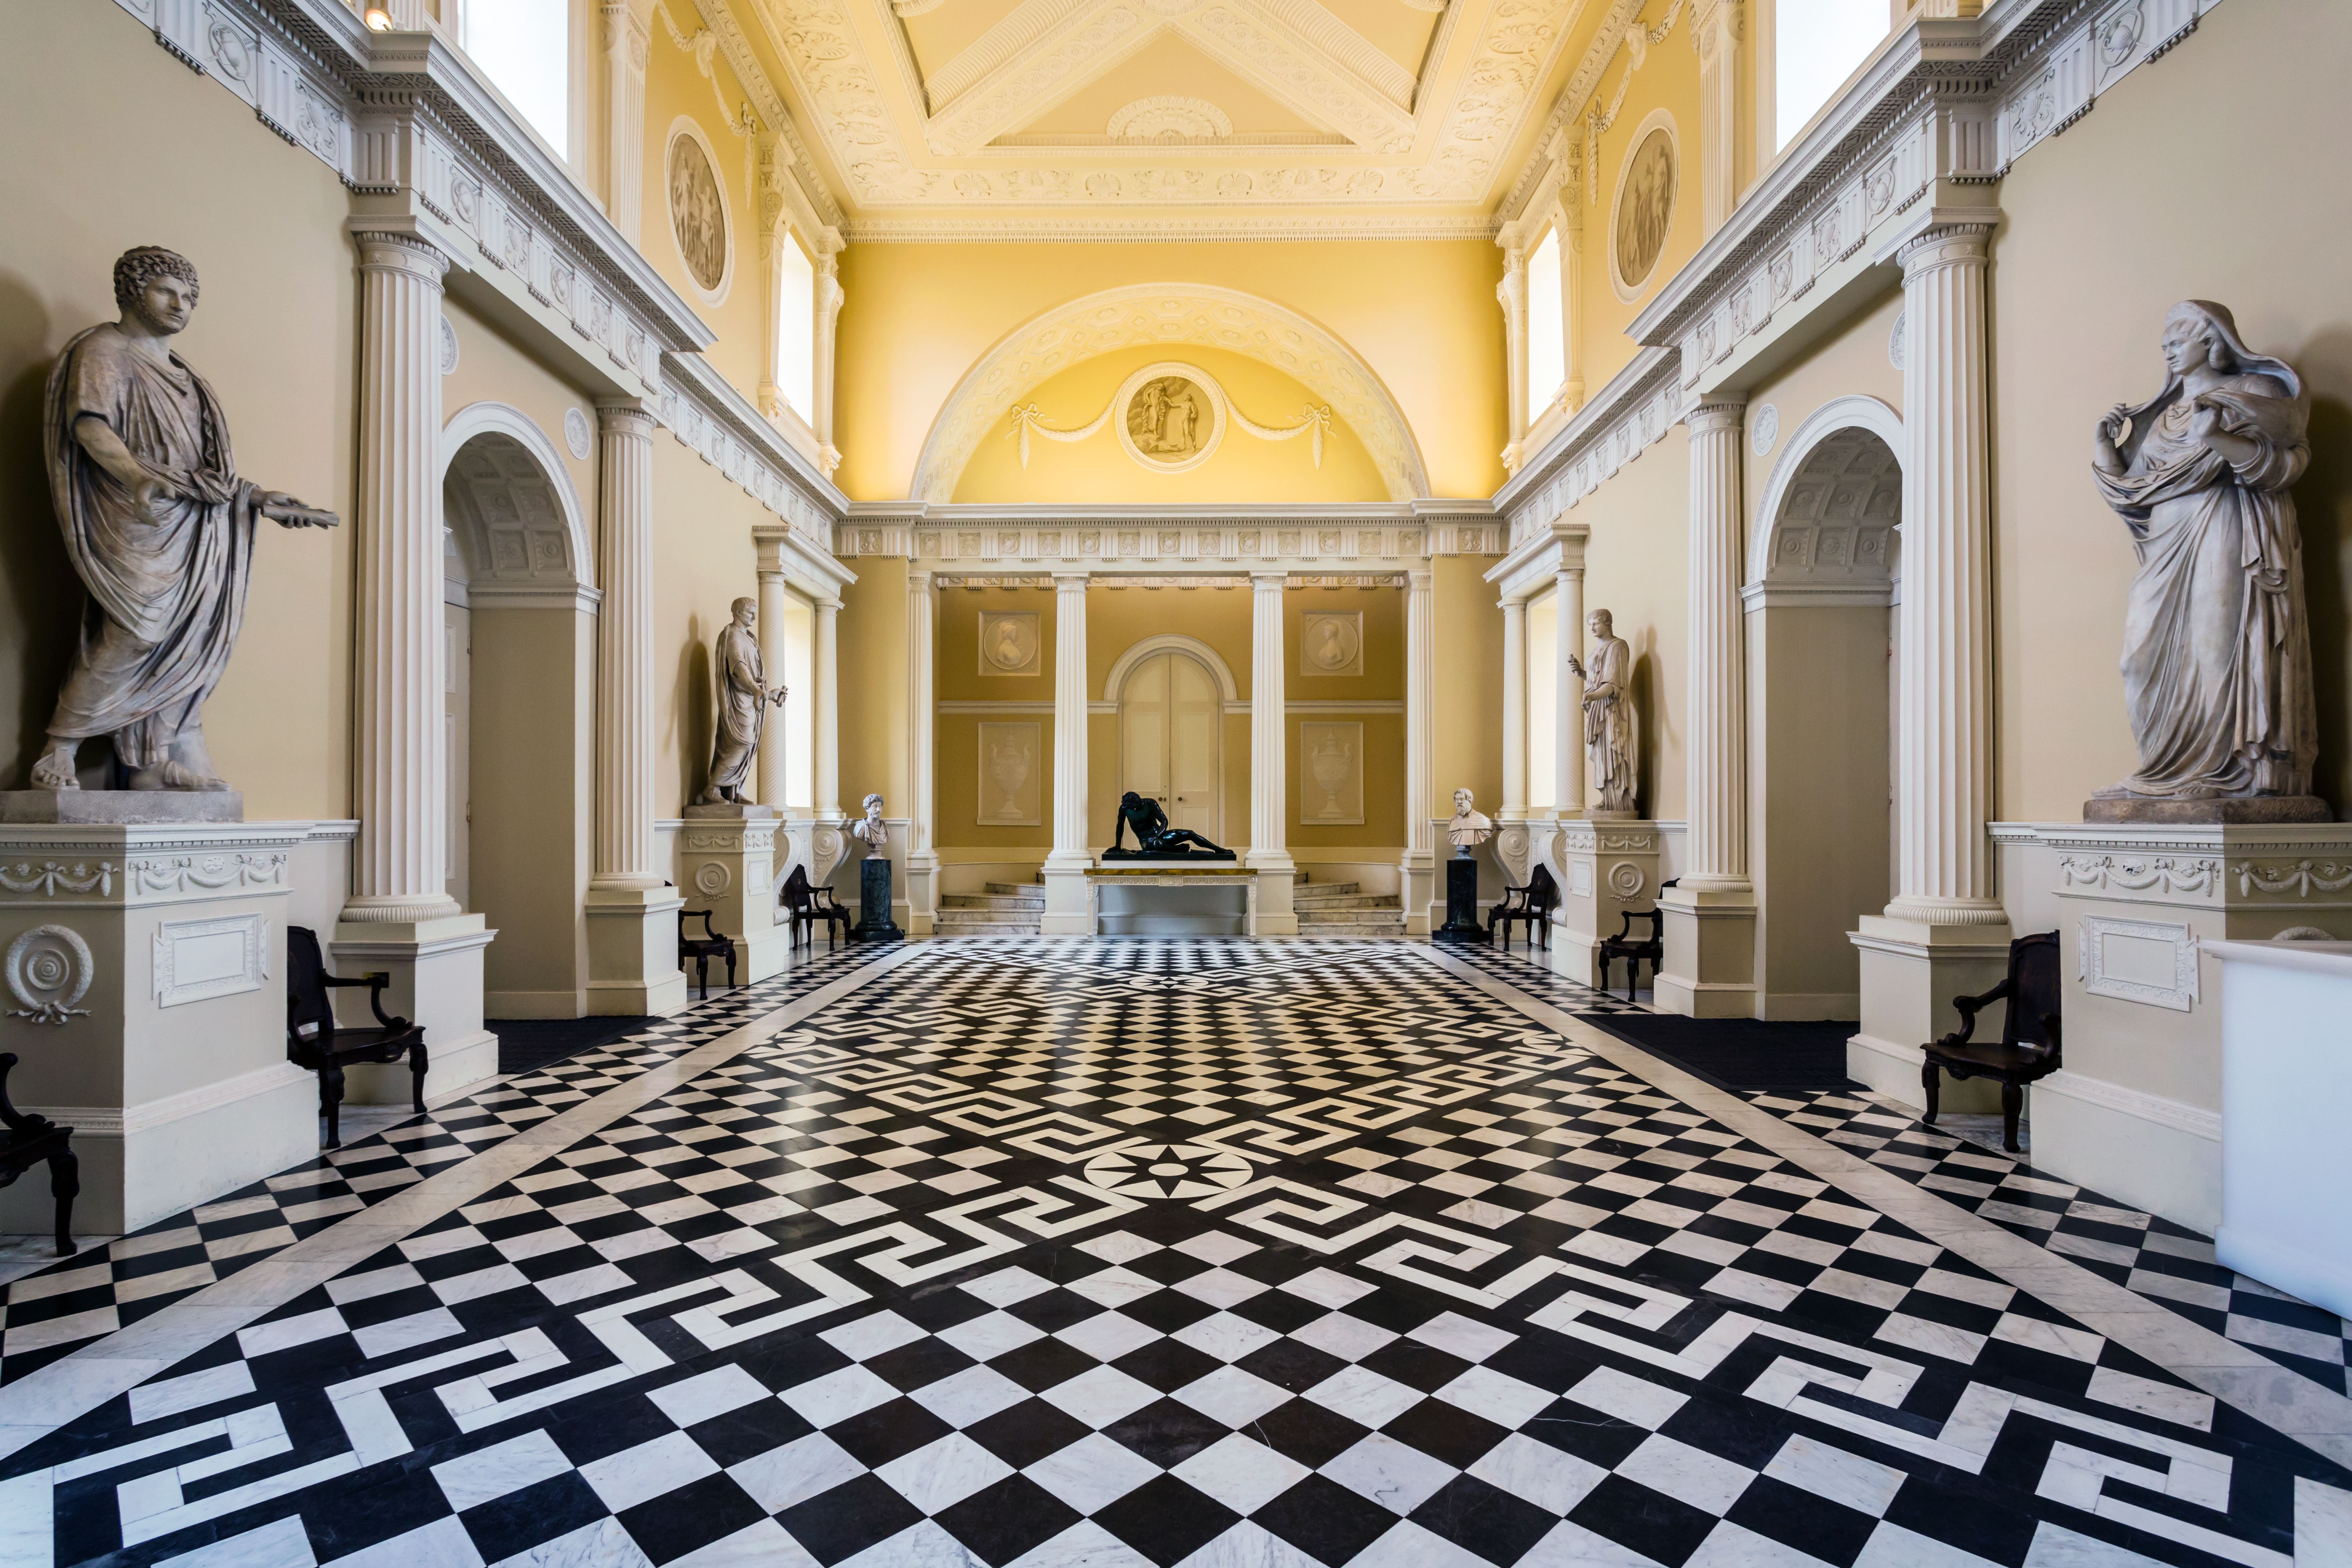 Syon House, Brentford, Middlesex, London, England